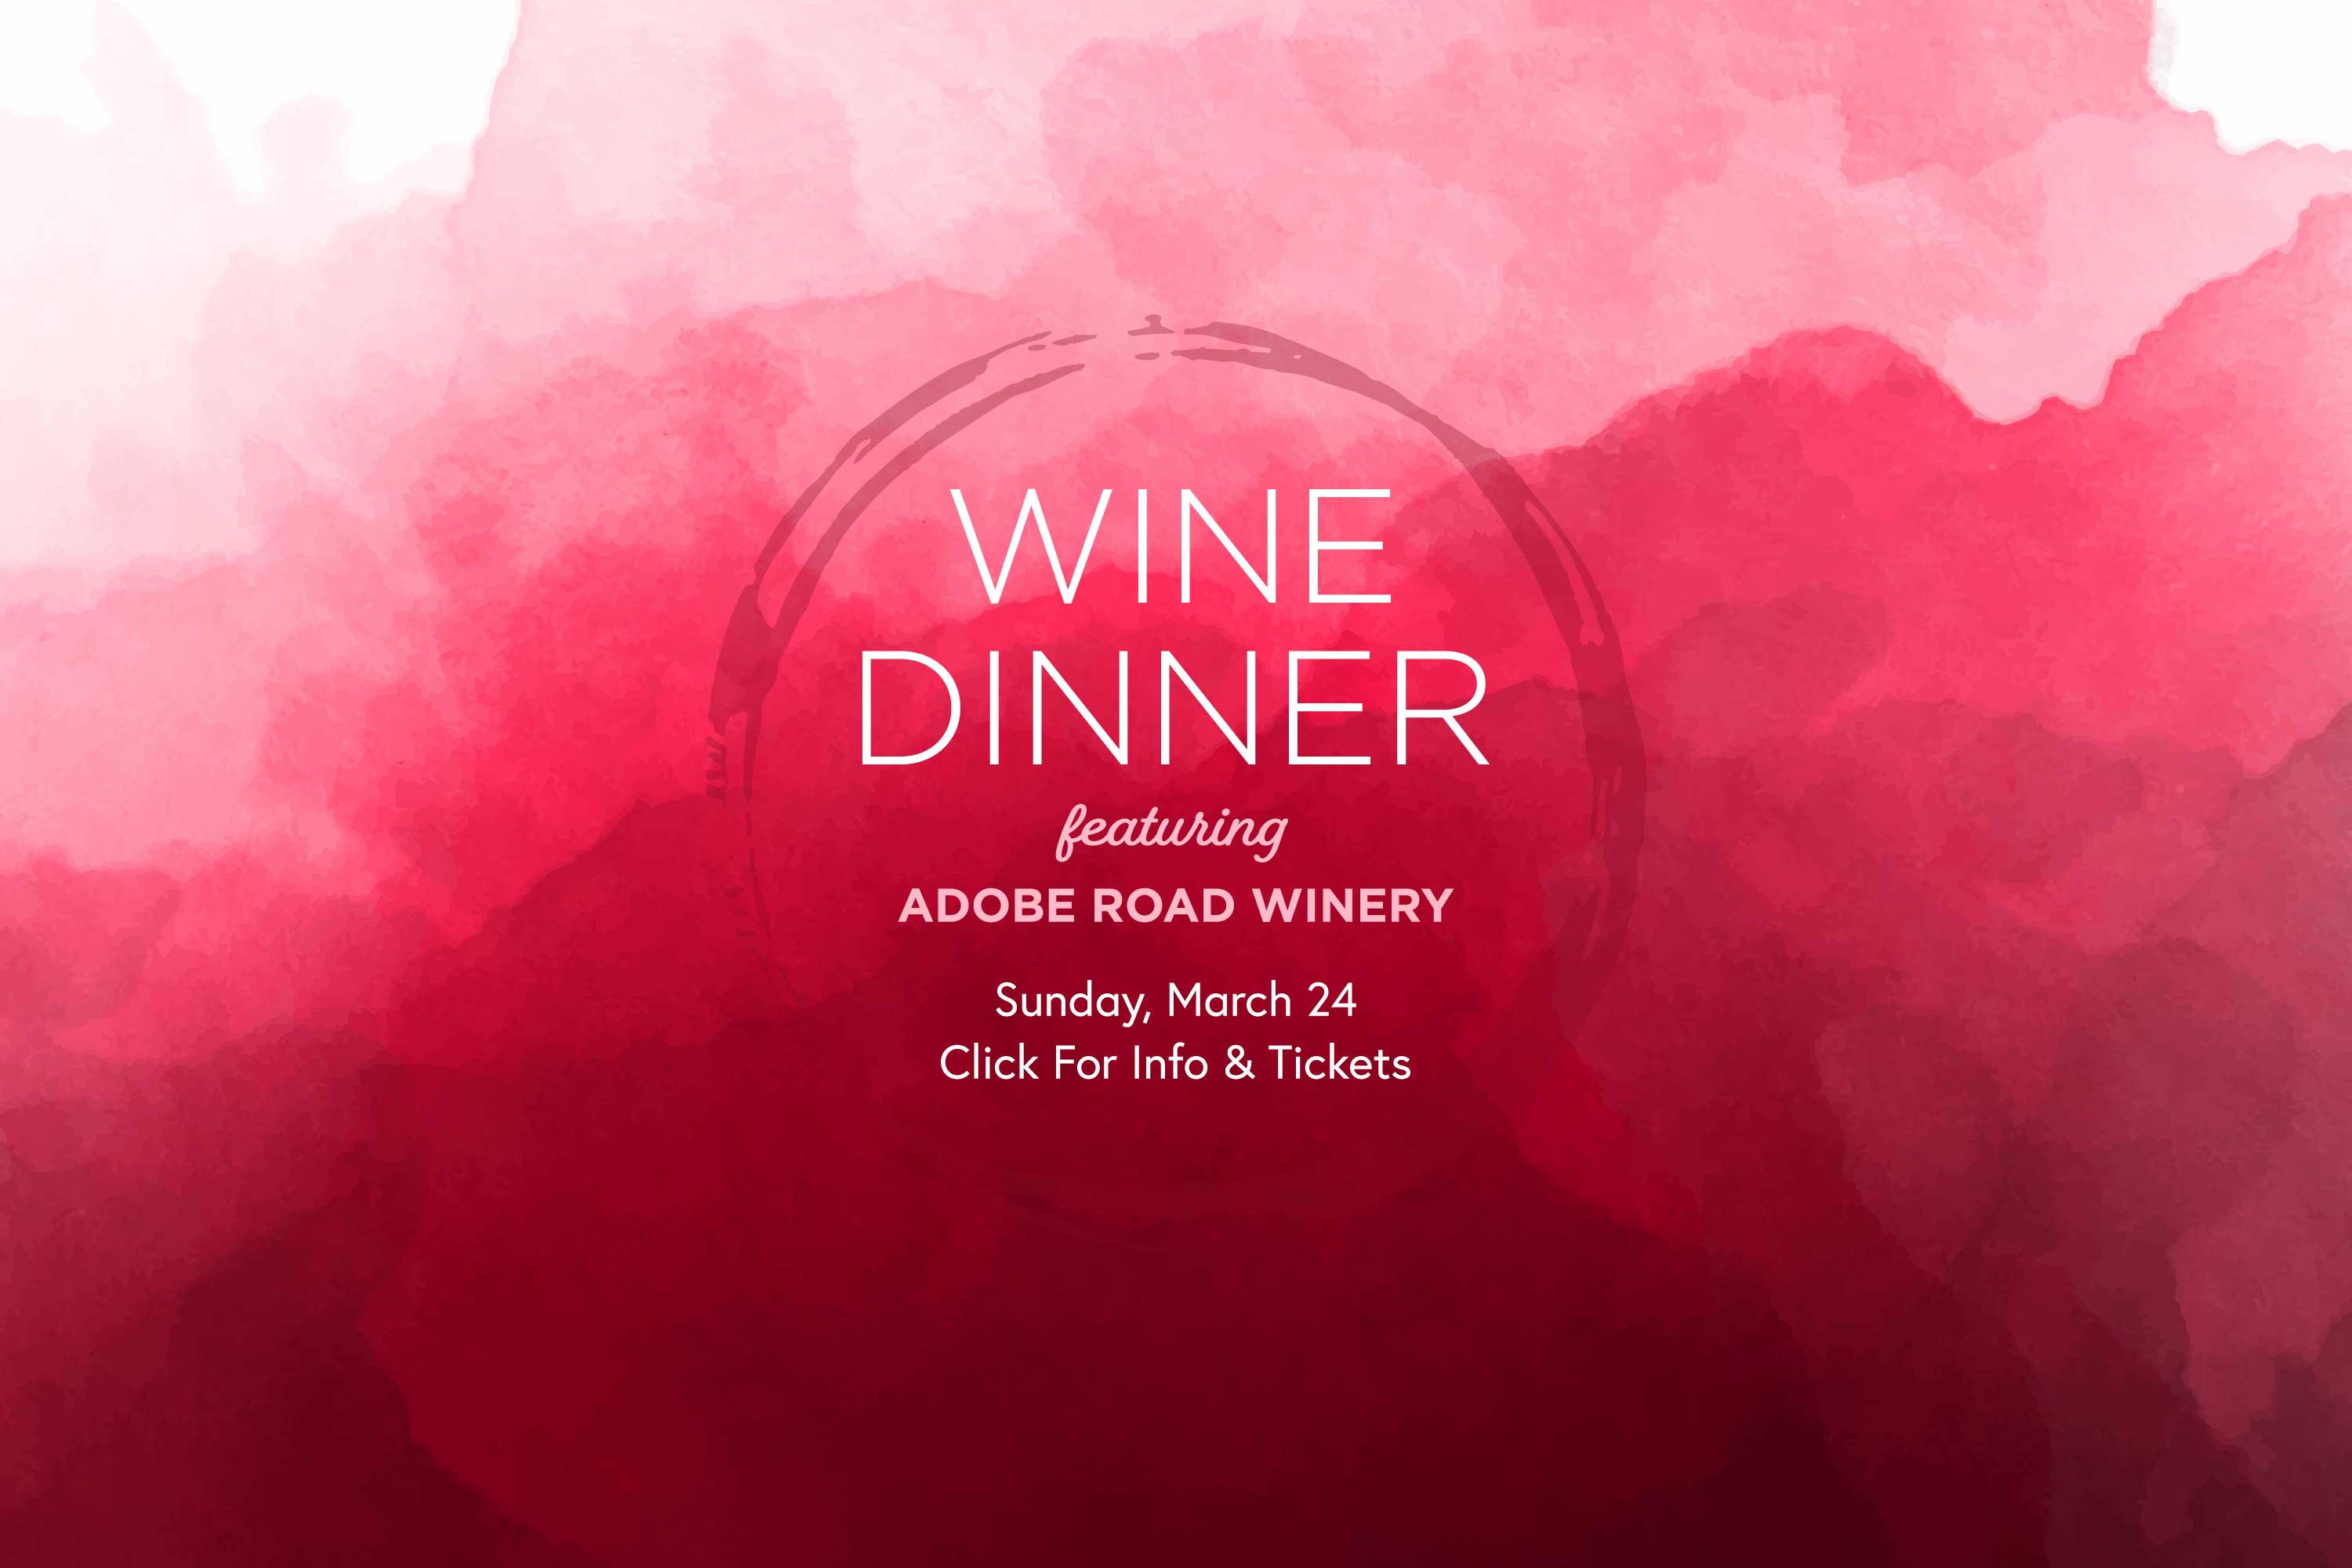 Mezzo Wine Dinner on Sunday, March 24th from 6pm to 9pm. Click for info and tickets.